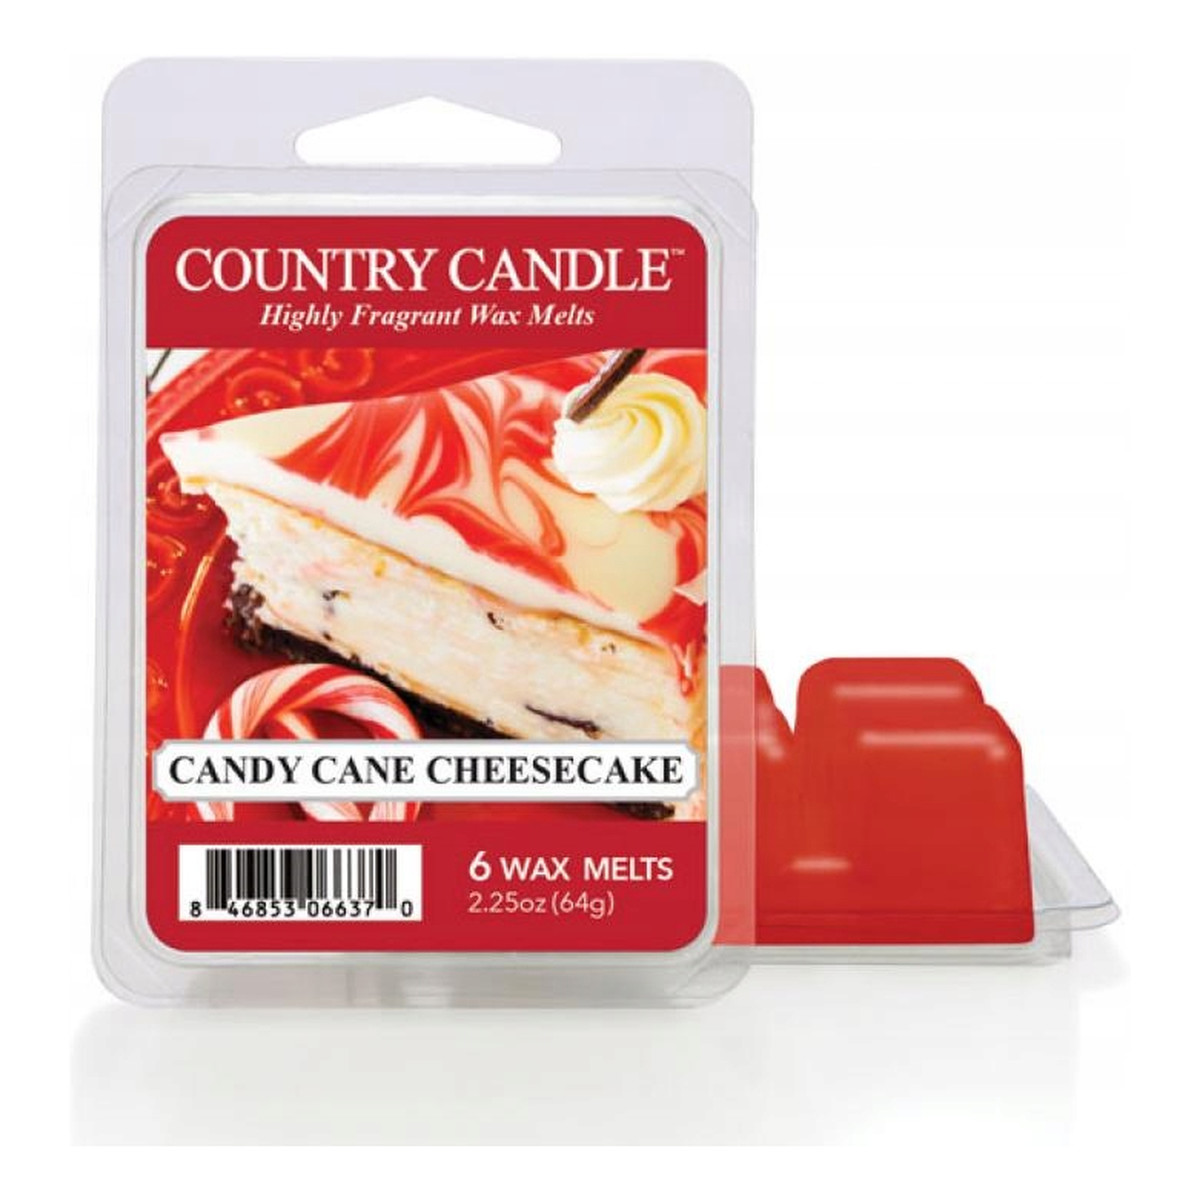 Country Candle Wax wosk zapachowy "potpourri" candy cane cheesecake 64g